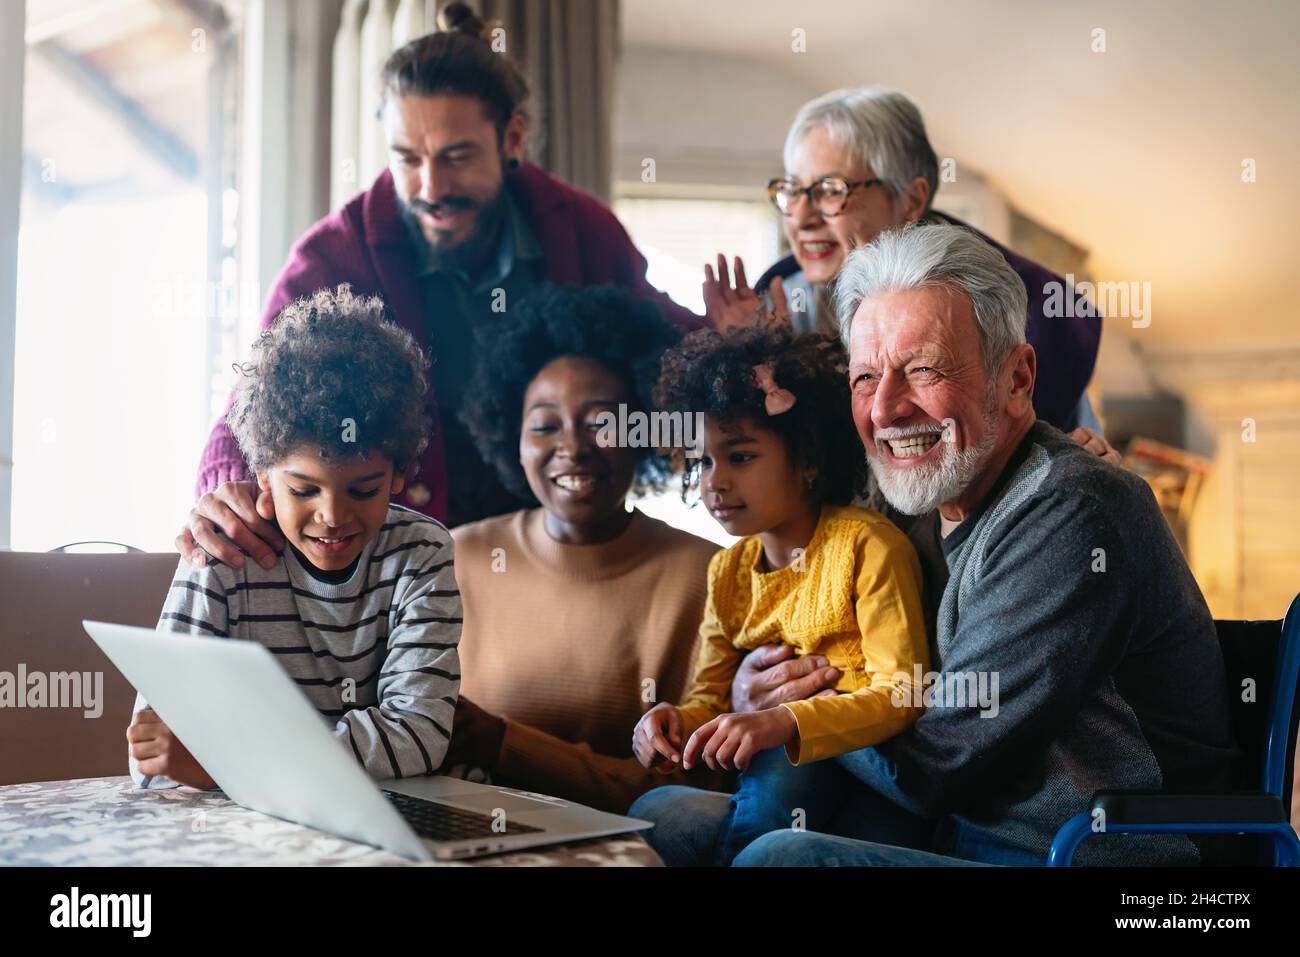 Portrait of a happy multigeneration family using electronic devices at home together Stock Photo